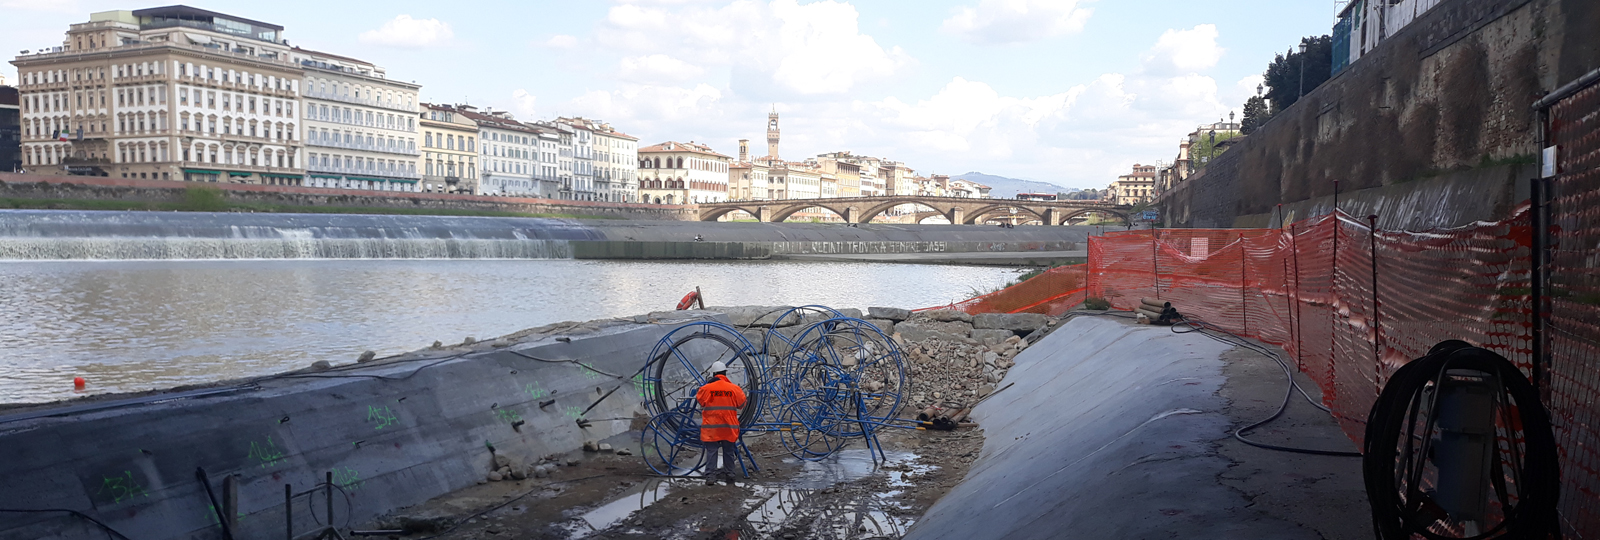 Trevi know-how and technology for the safety of the Vespucci bridge in Florence | News Trevi Group English site 1